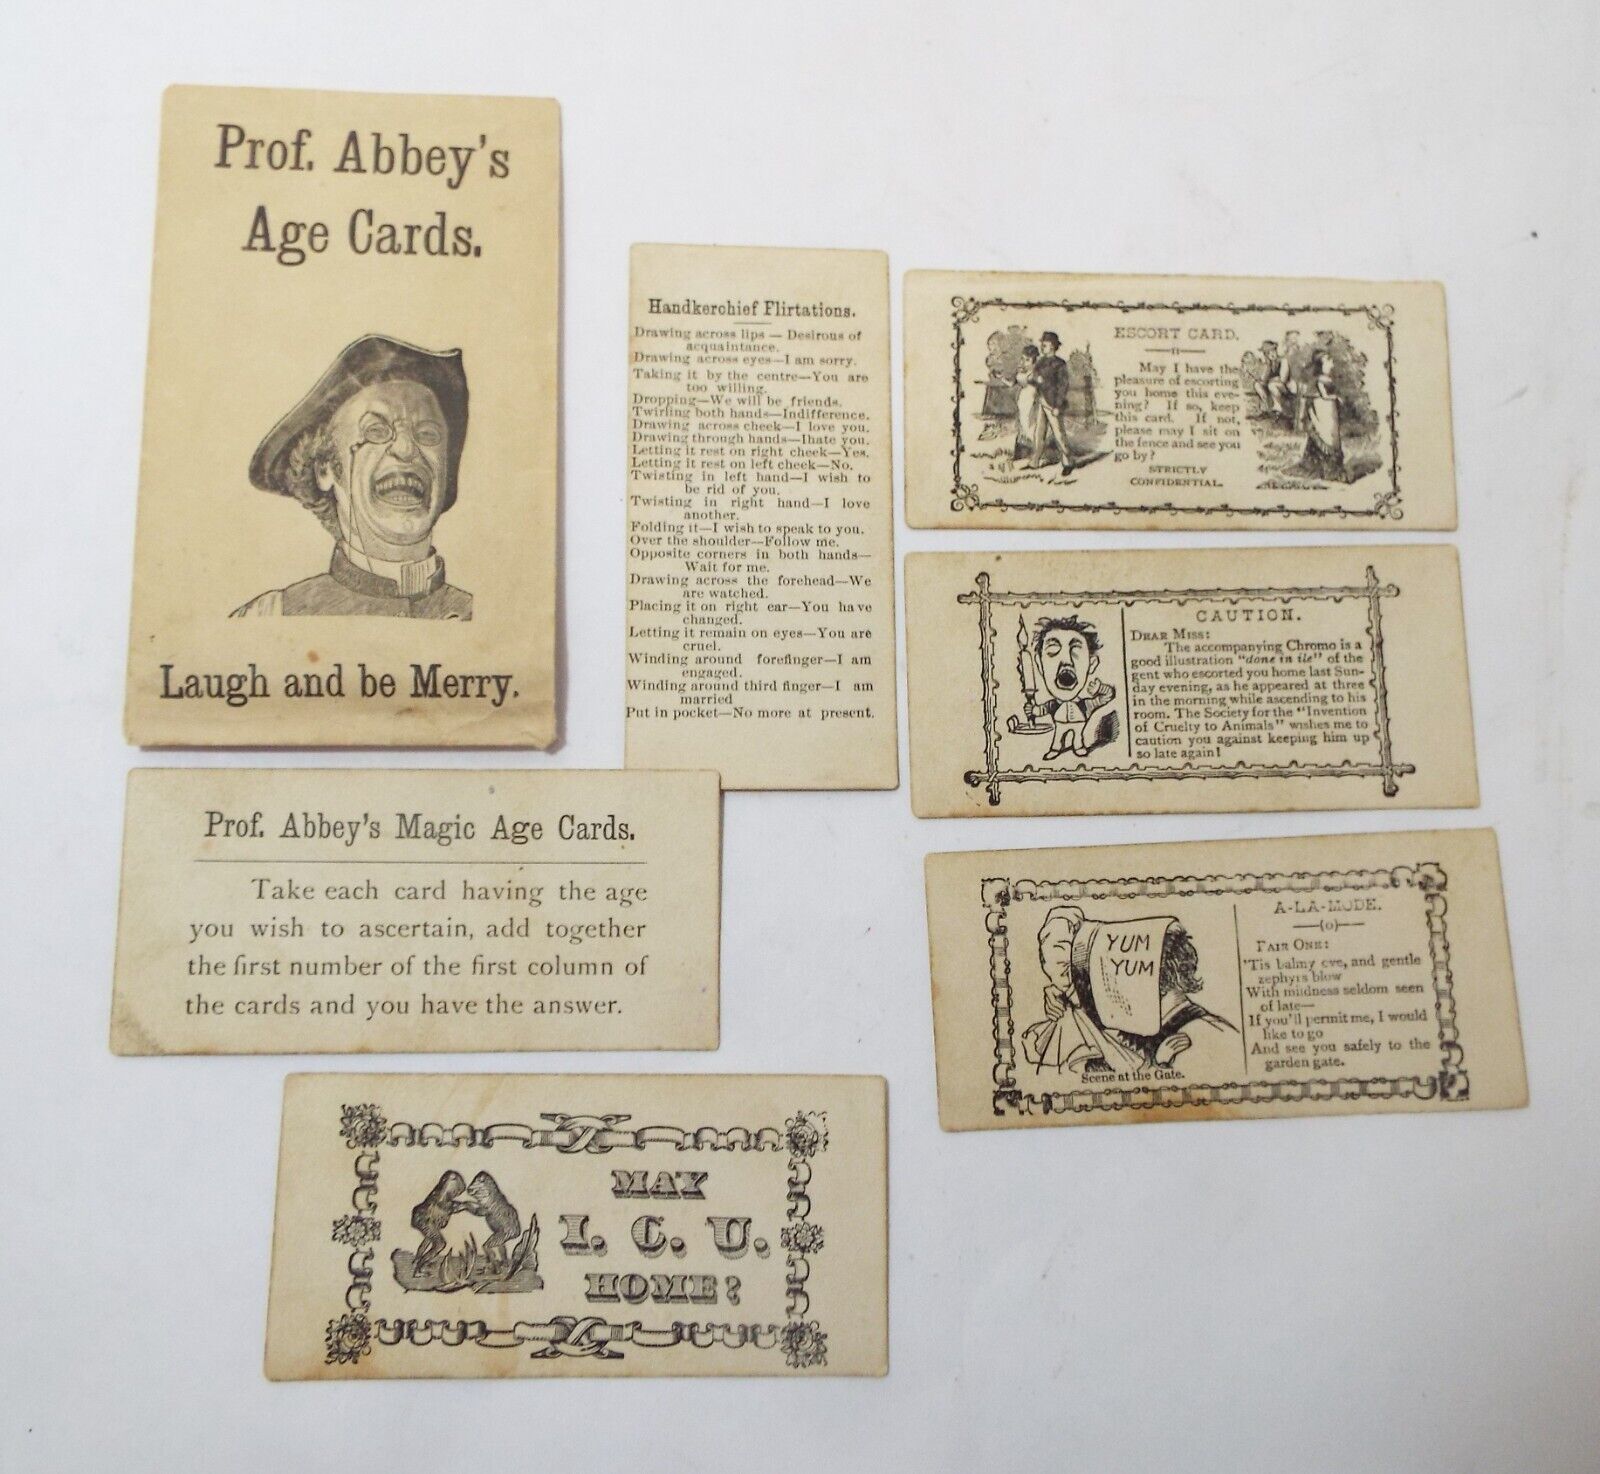 RARE Old Antique PROF. ABBEY\'S AGE CARDS w/ Envelope MAGIC AGE CARDS Humor